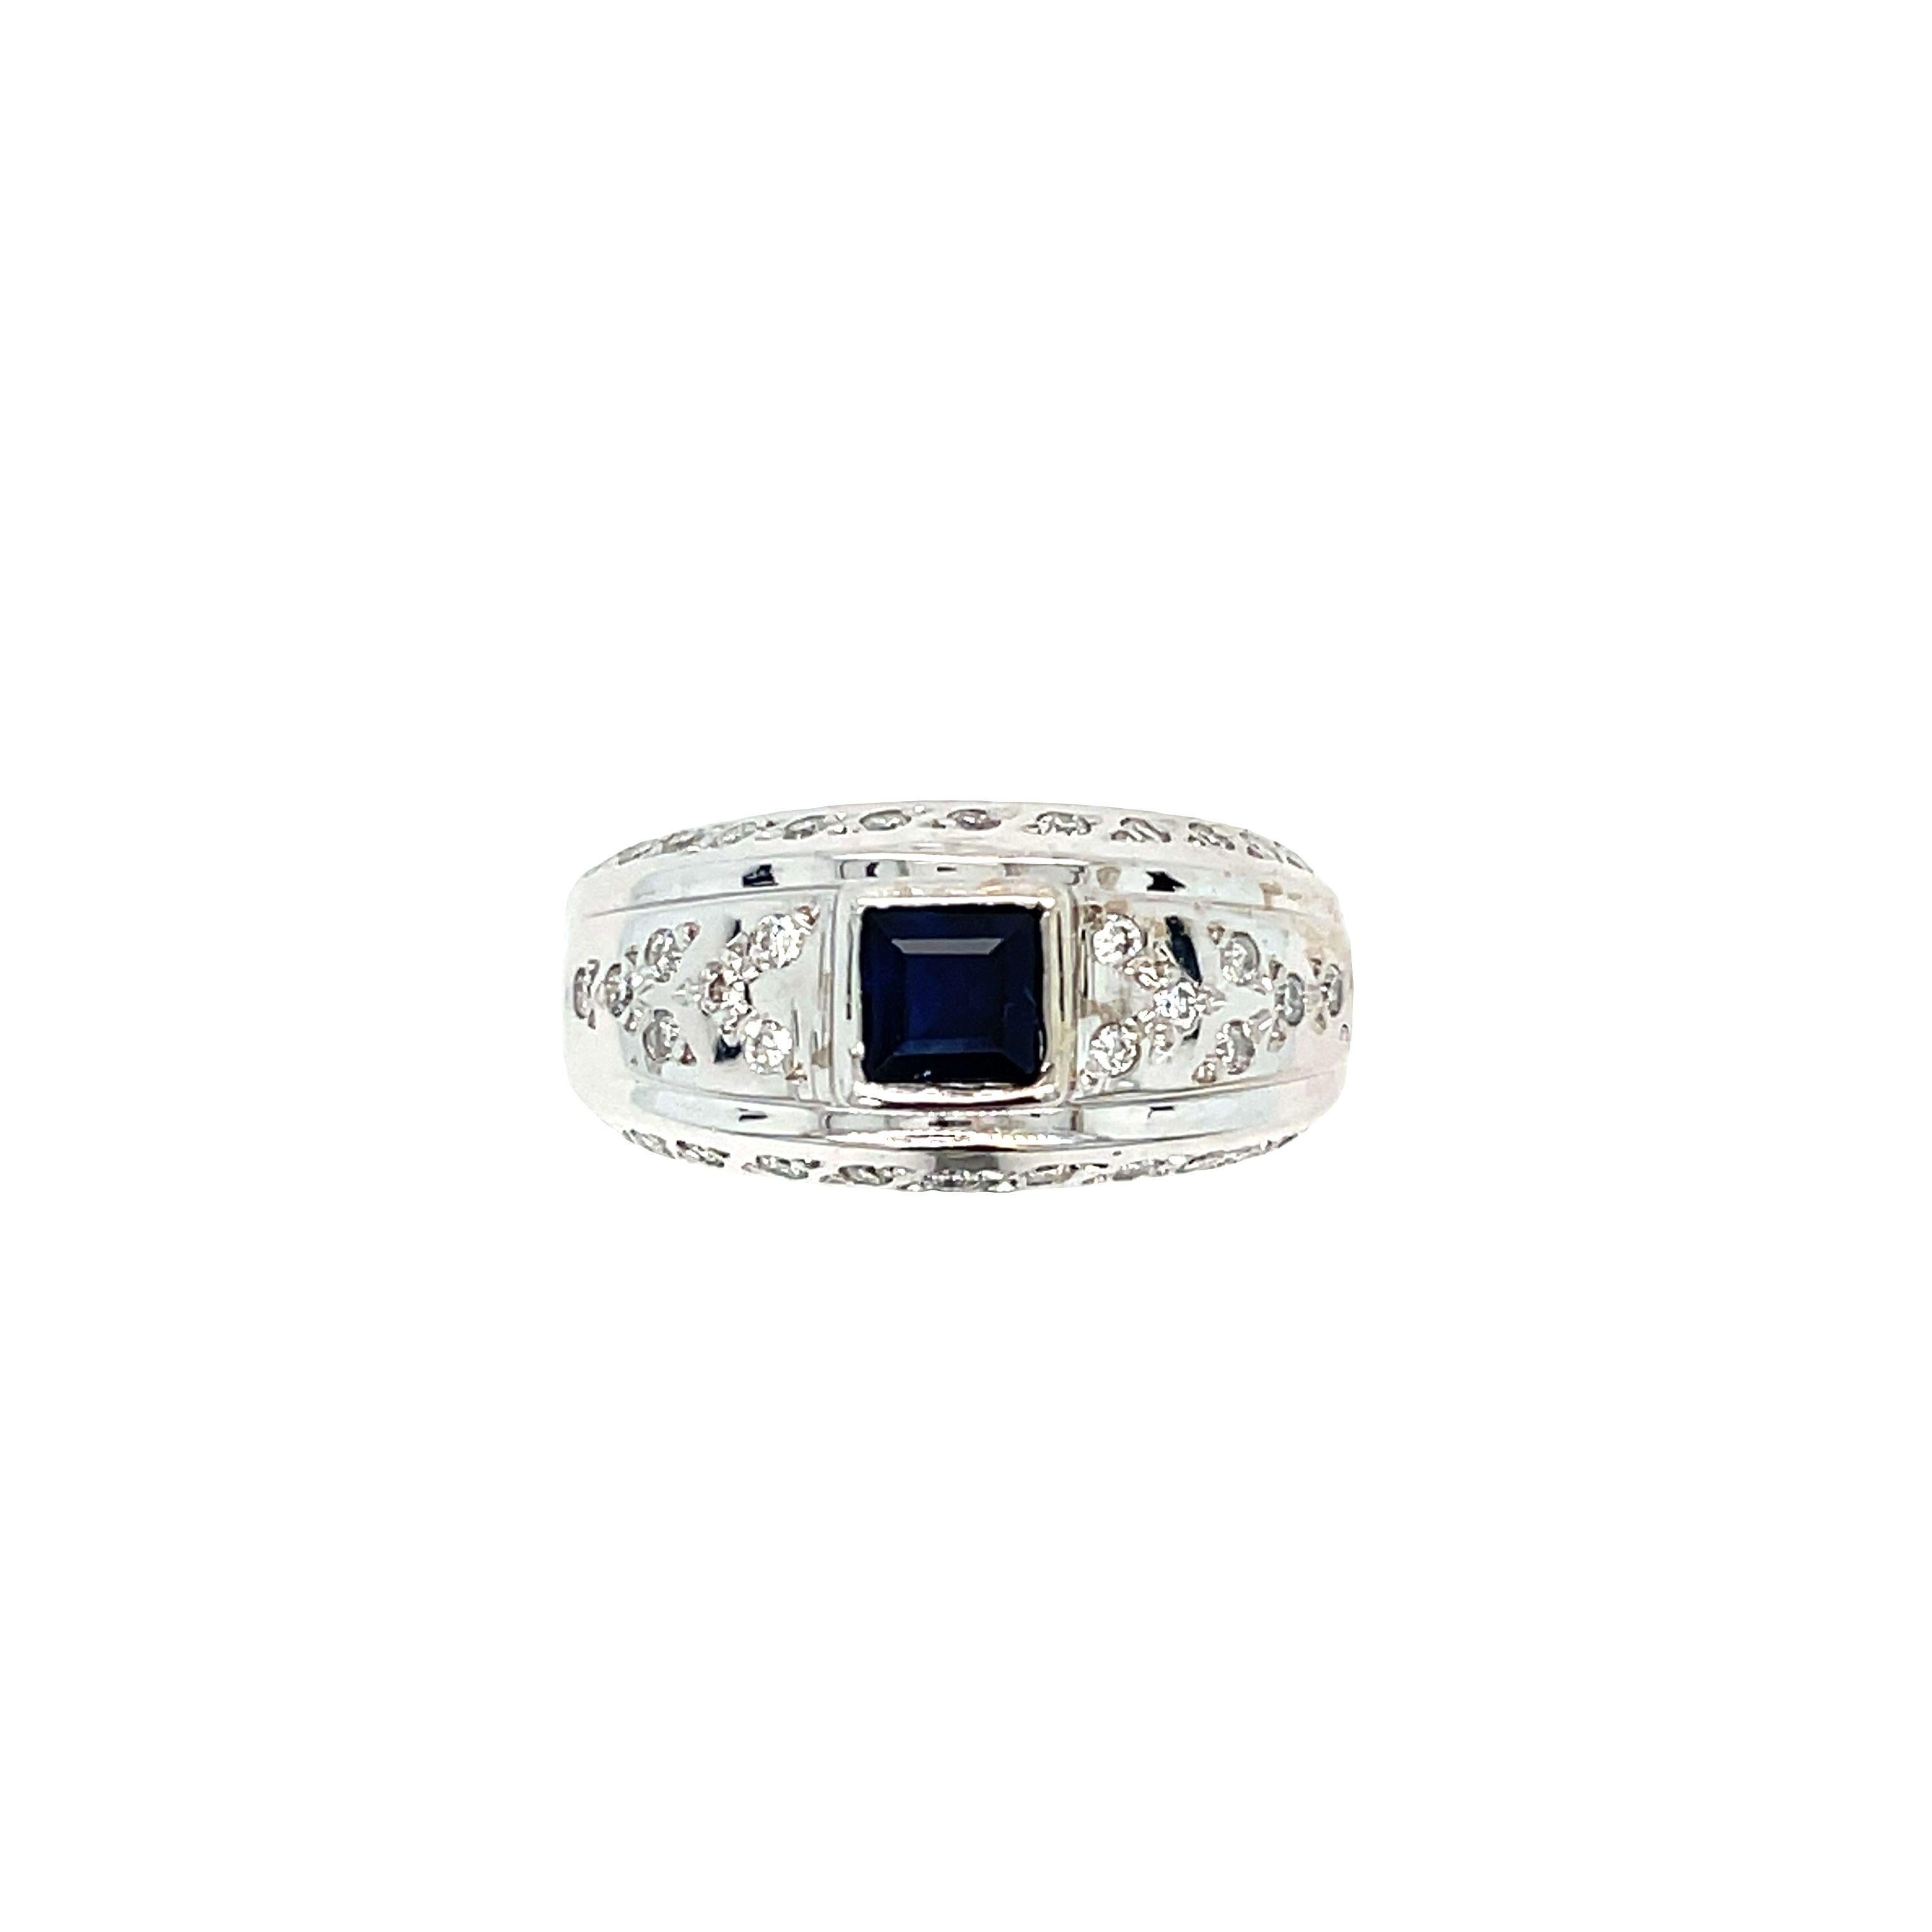 Elegant and contemporary, this 14K White Gold Sapphire Diamond Ring features a stunning square-shaped Sapphire weighing approximately 0.65 carat. Center Sapphire is beautifully showcased in a raised bezel setting, complemented by a dome setting